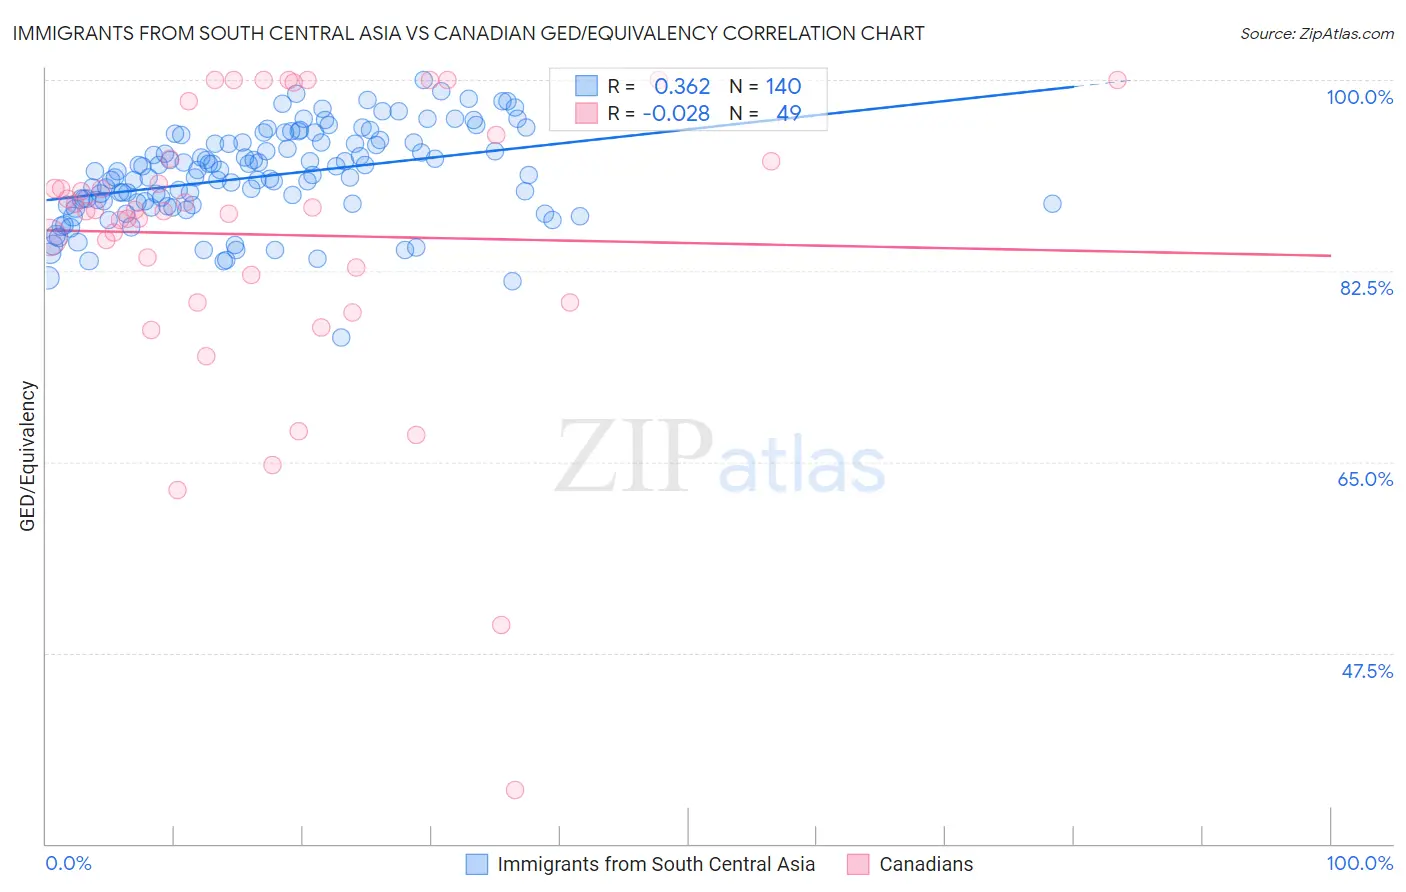 Immigrants from South Central Asia vs Canadian GED/Equivalency